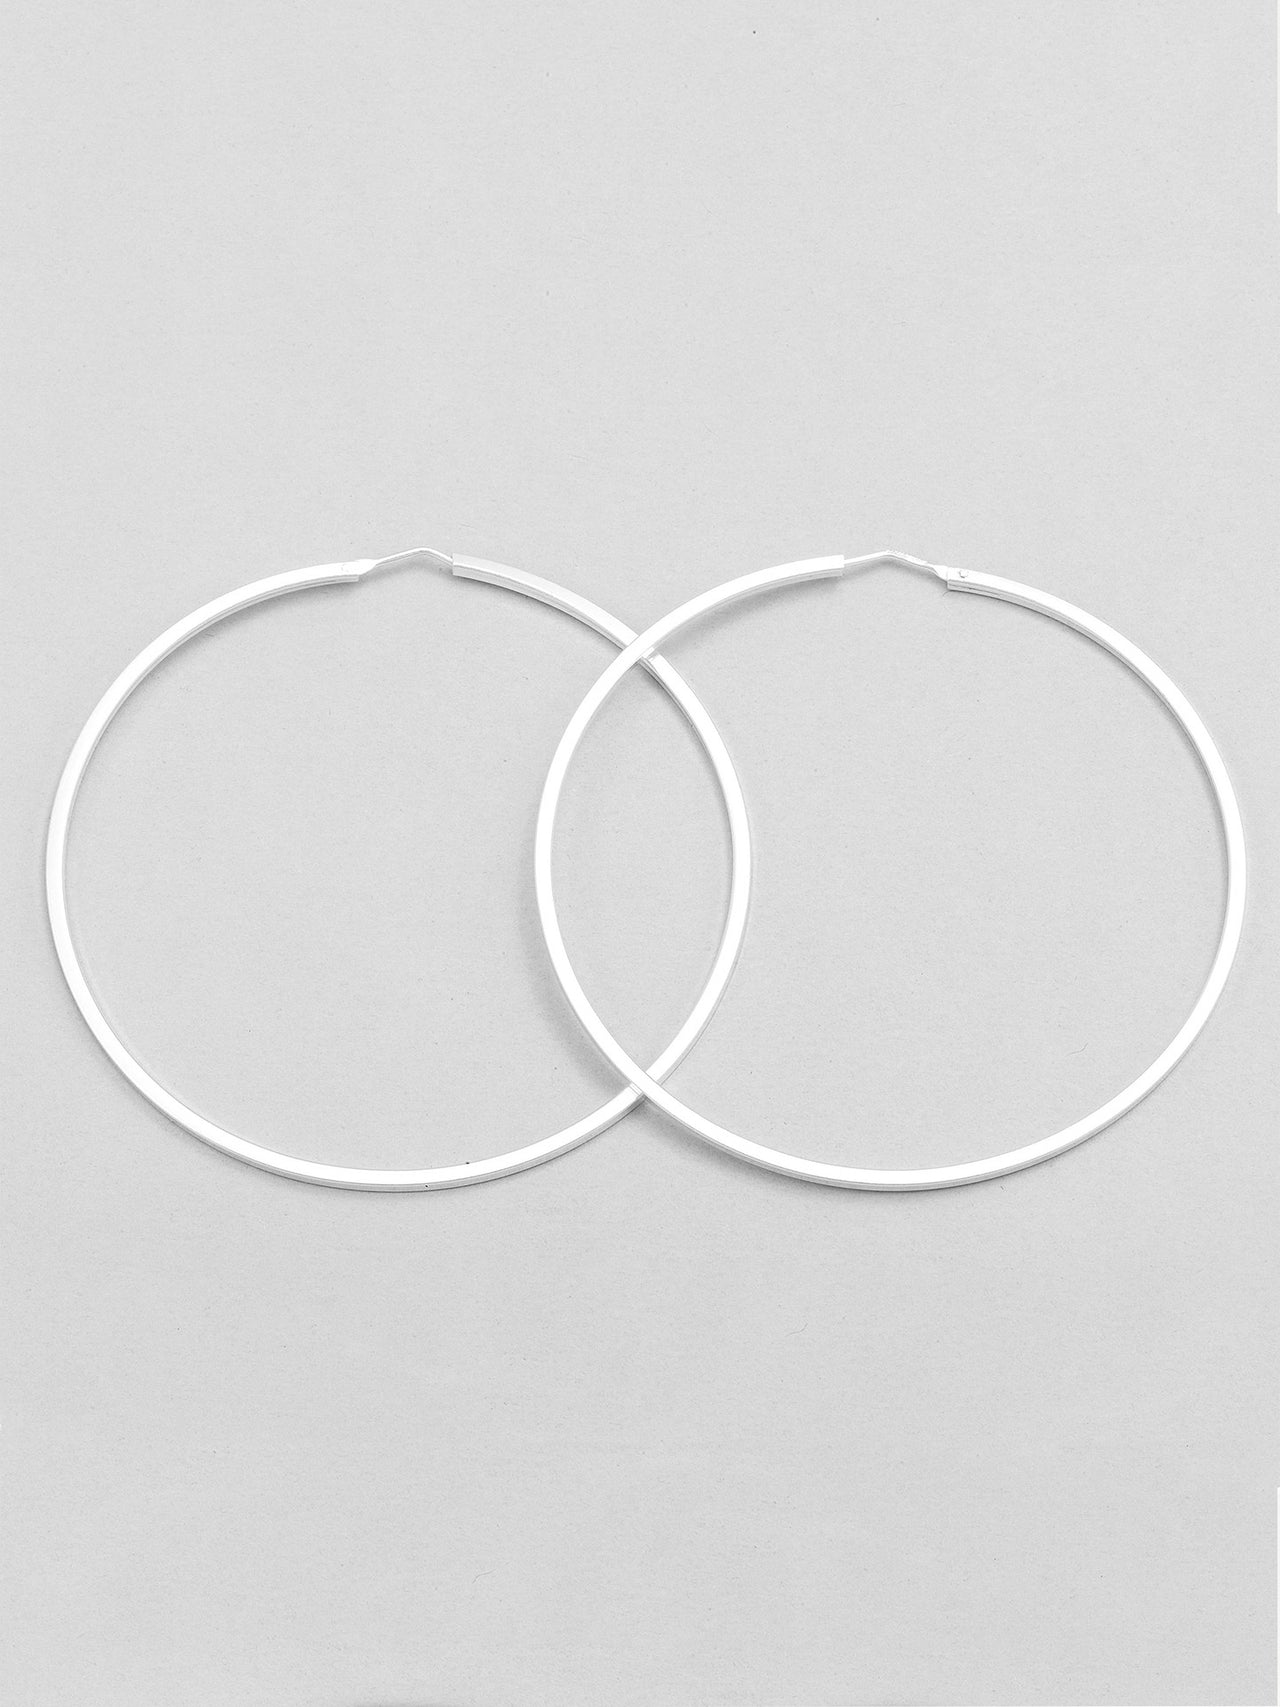 Sterling Silver XL Infinity Hoops pictured on light grey background.